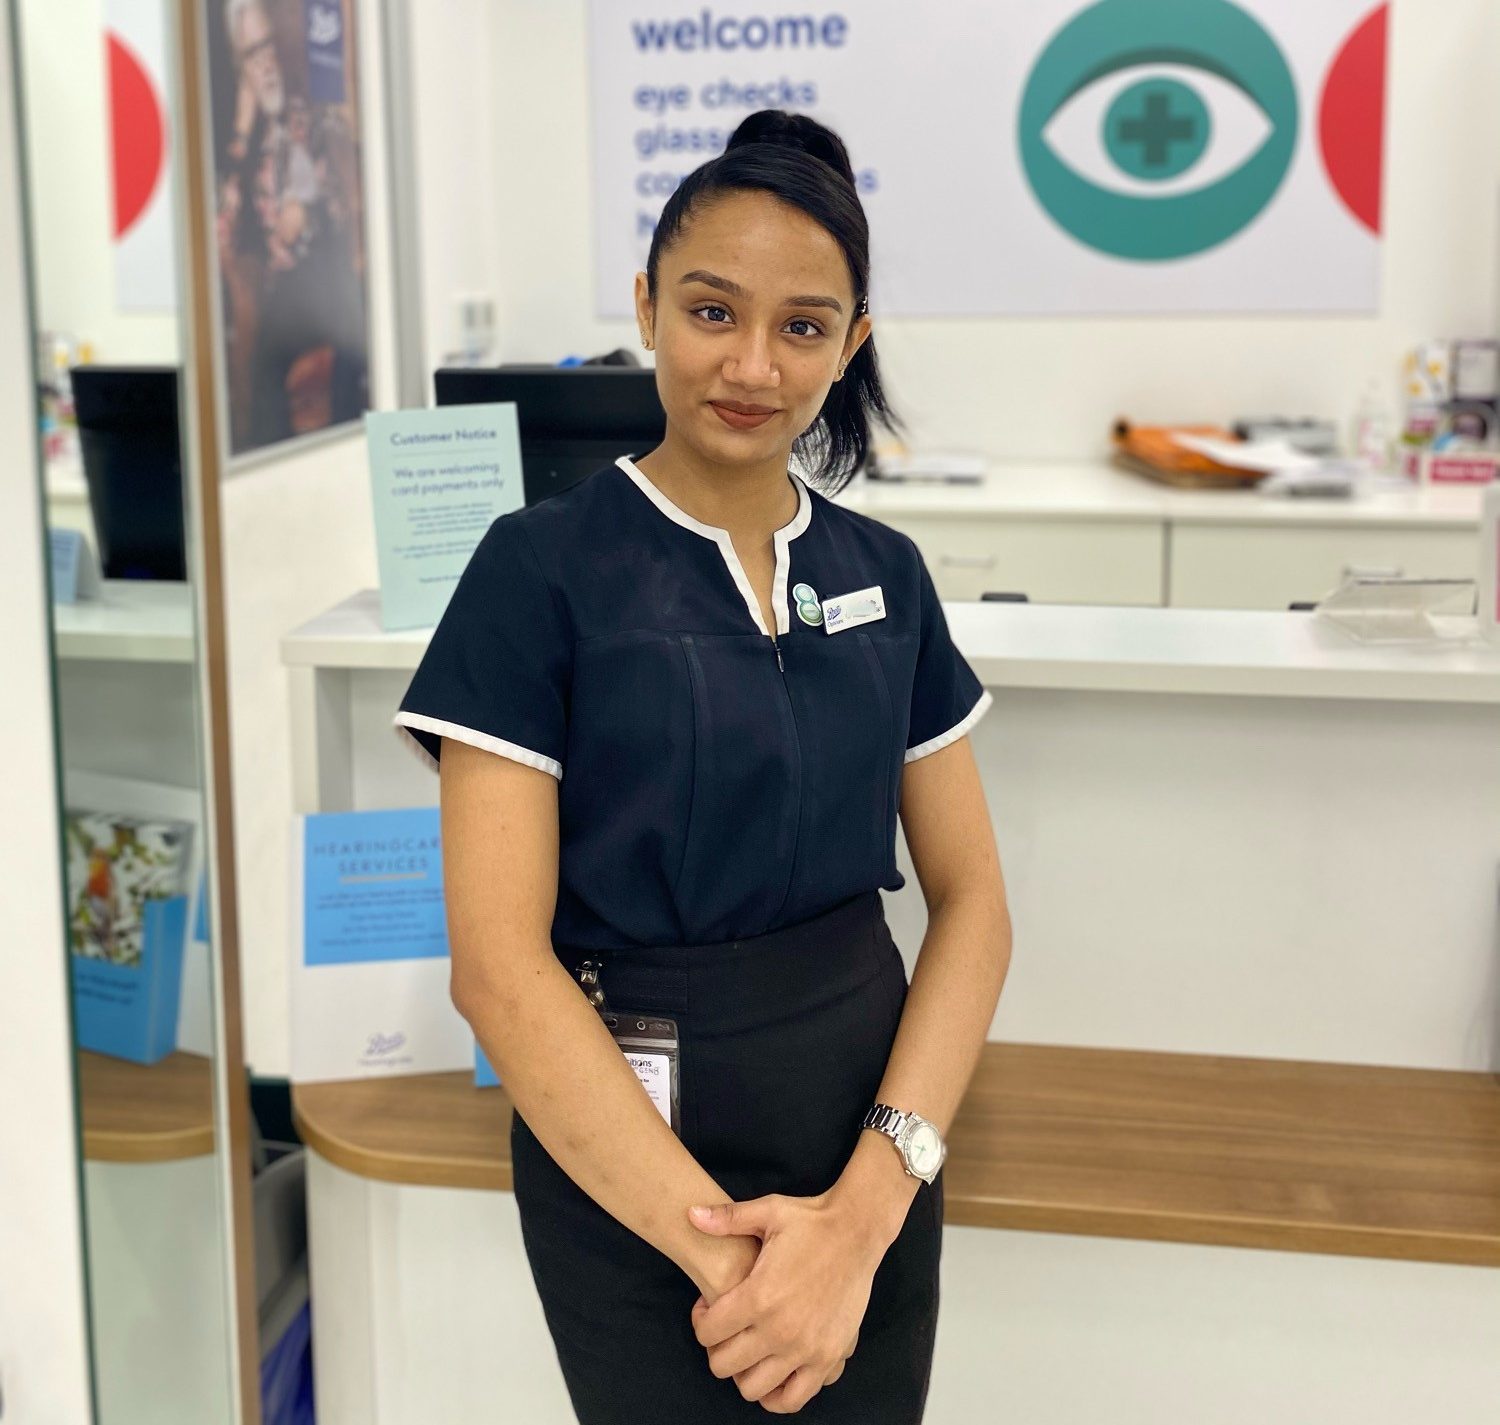 Optical Consultant to Completing an Optometry Degree – Amrutha’s Story